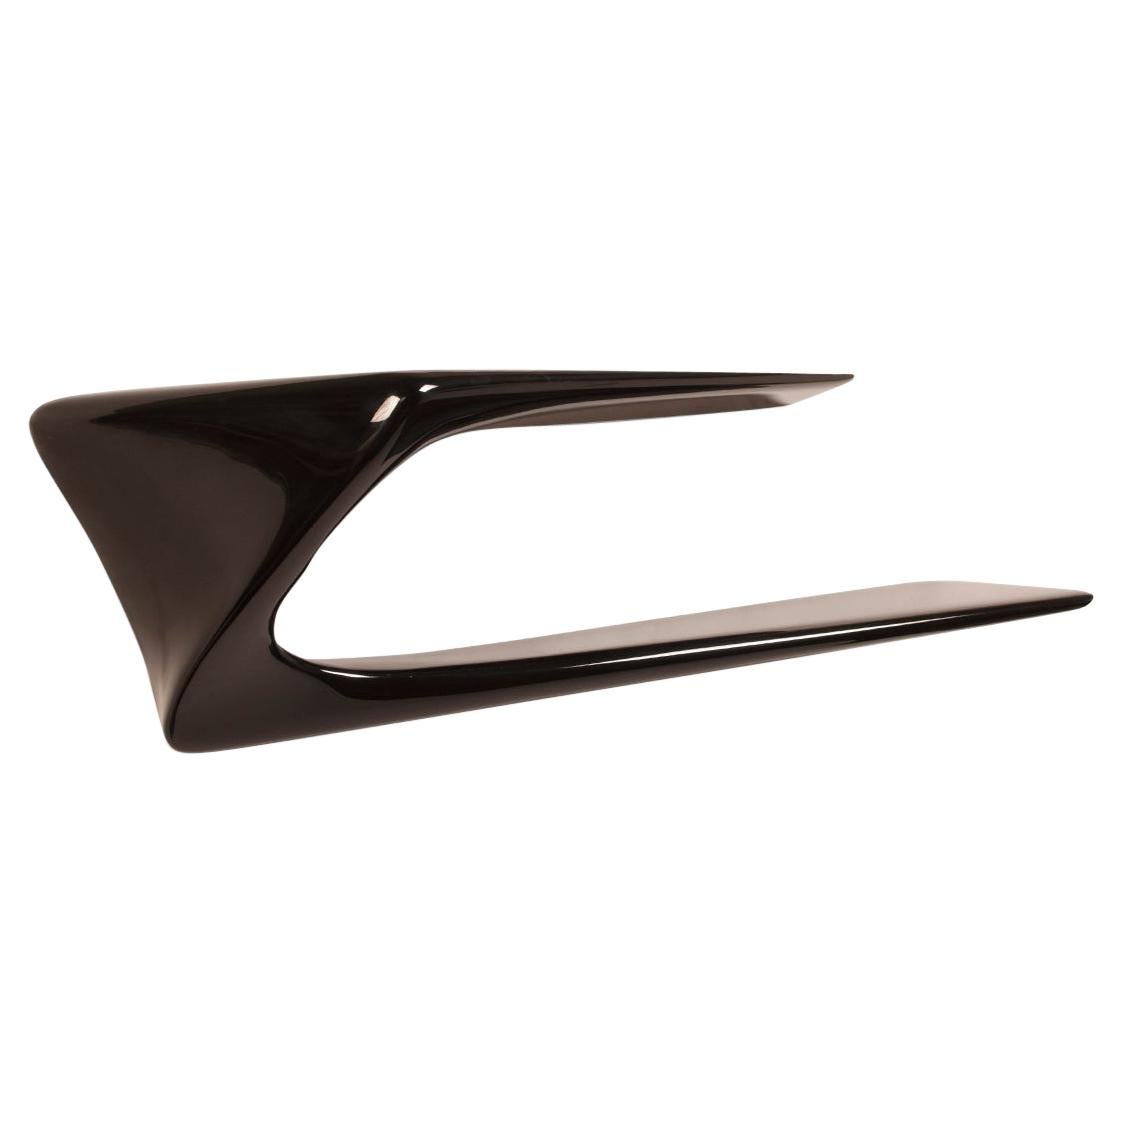 Amorph Flux modern shelf Black Lacquer Wall Mounted For Sale